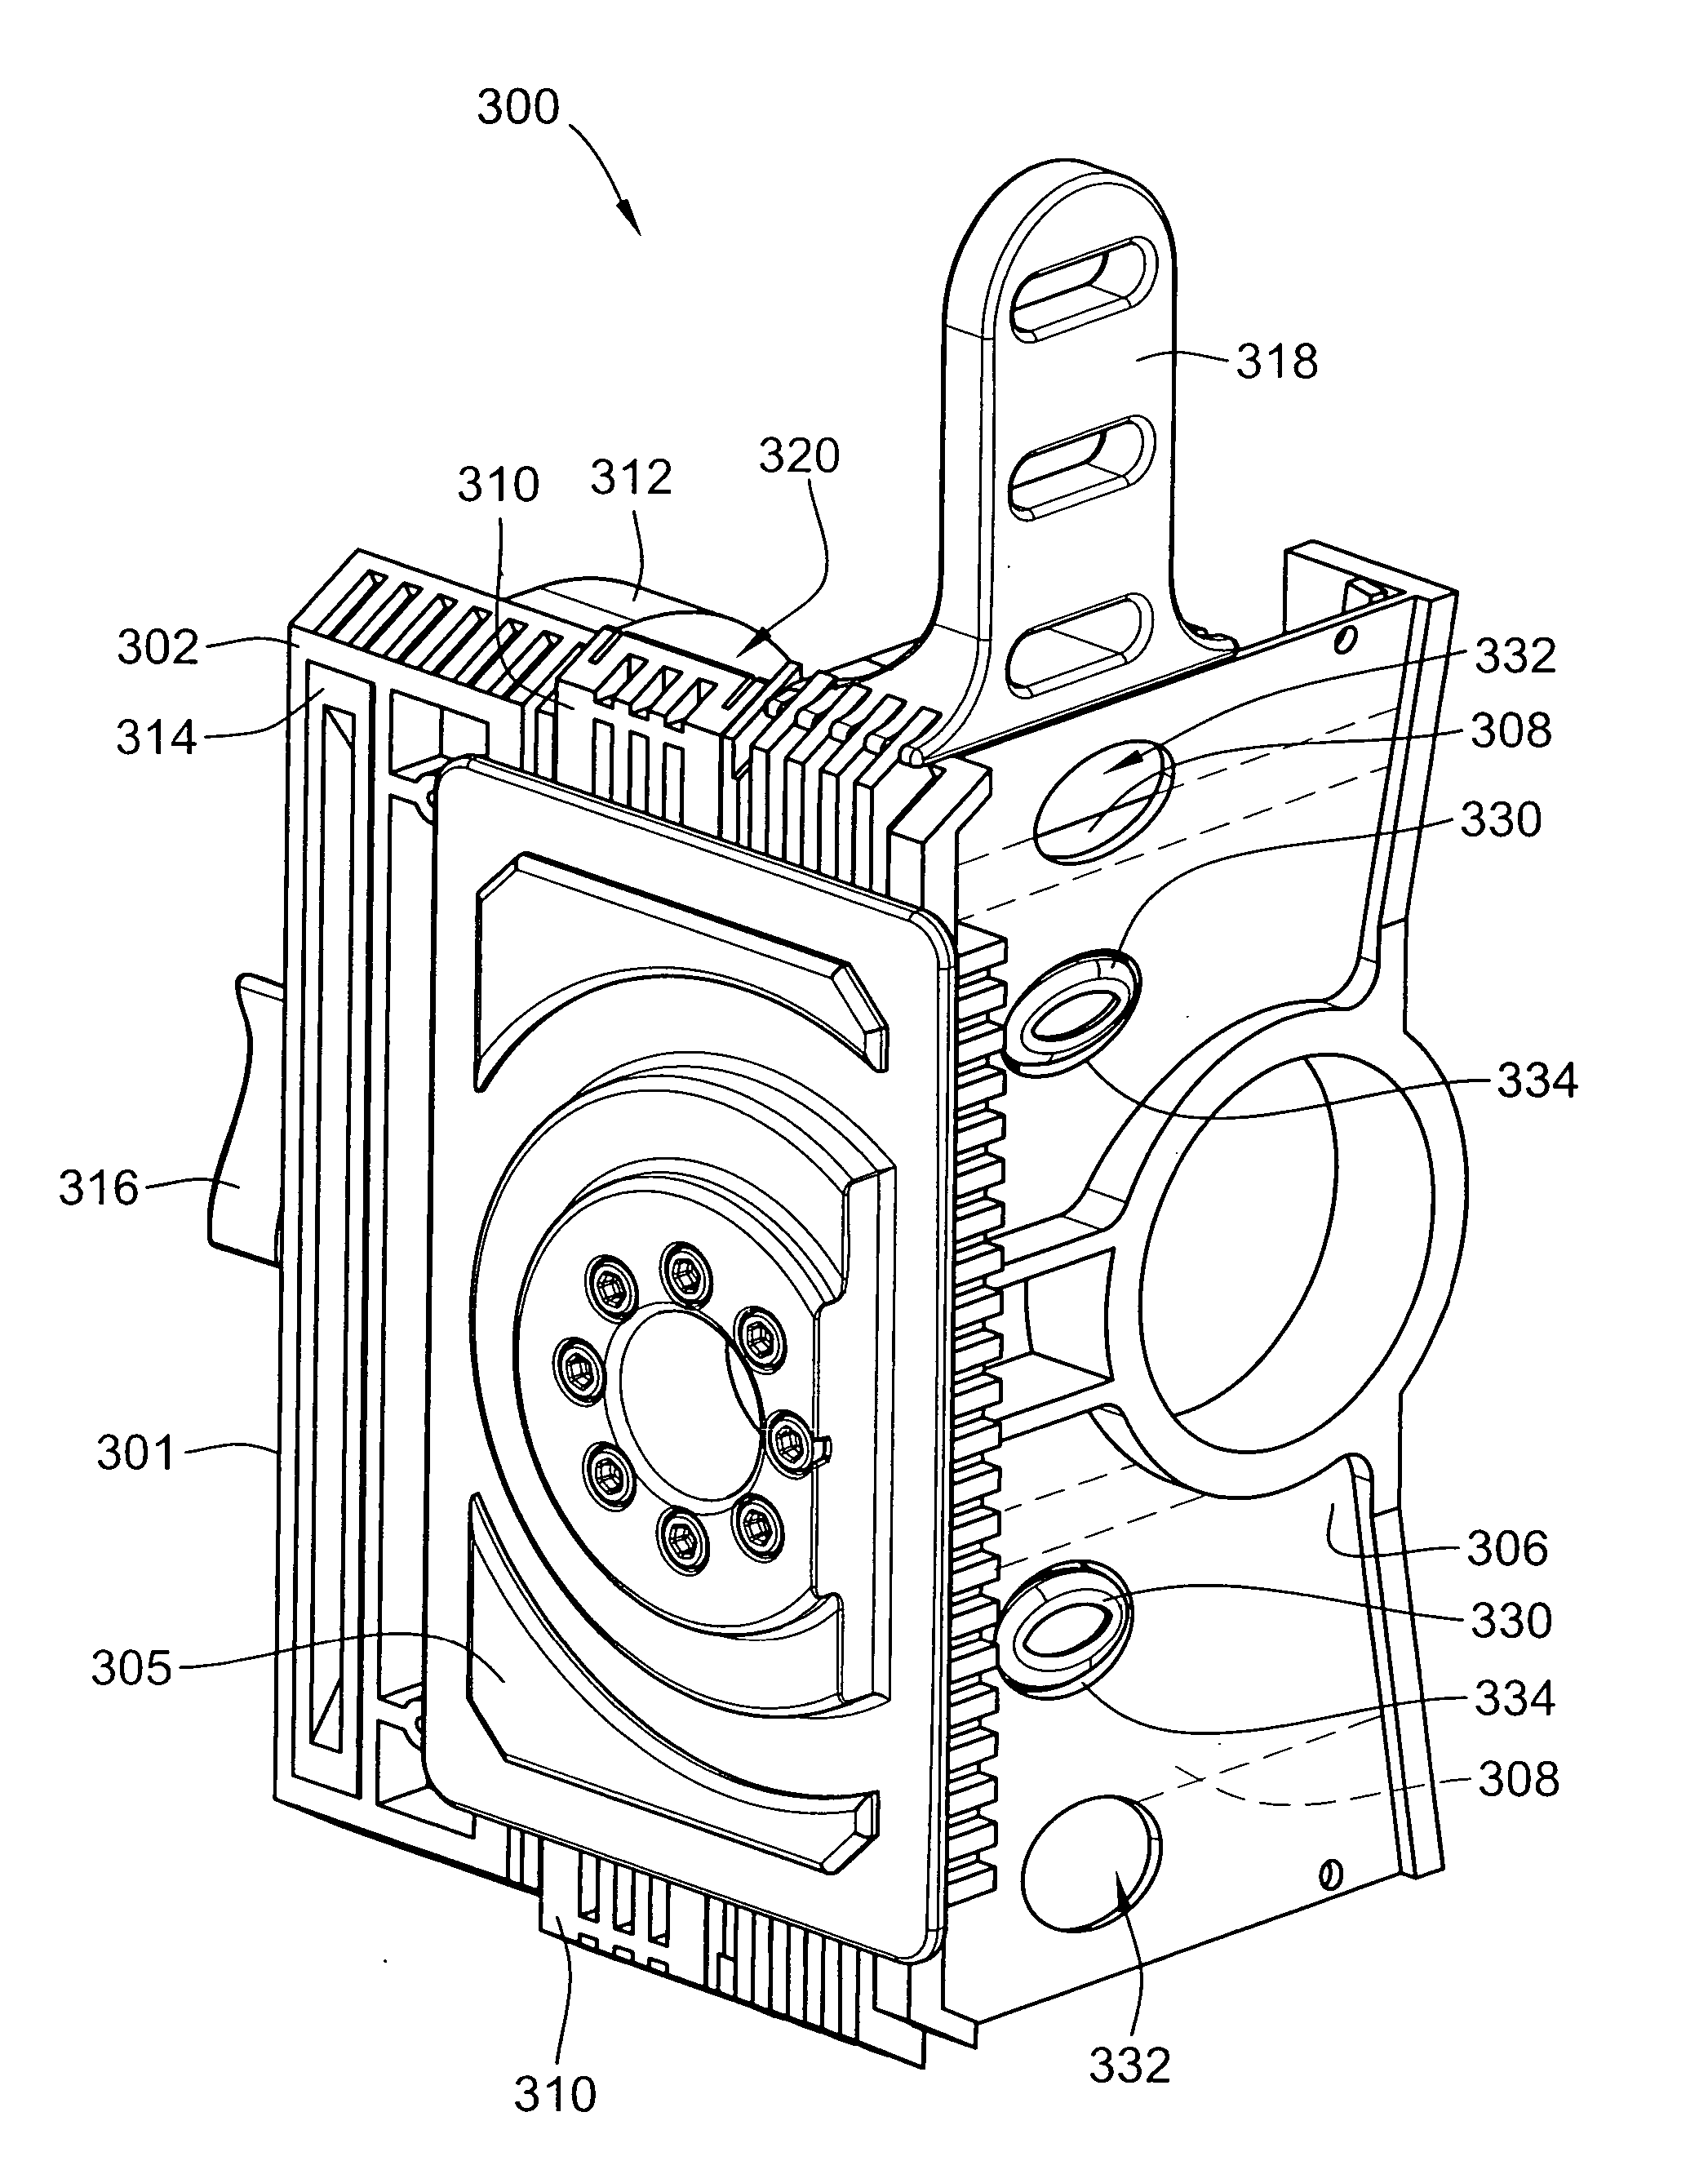 Apparatus and method for hanging a door